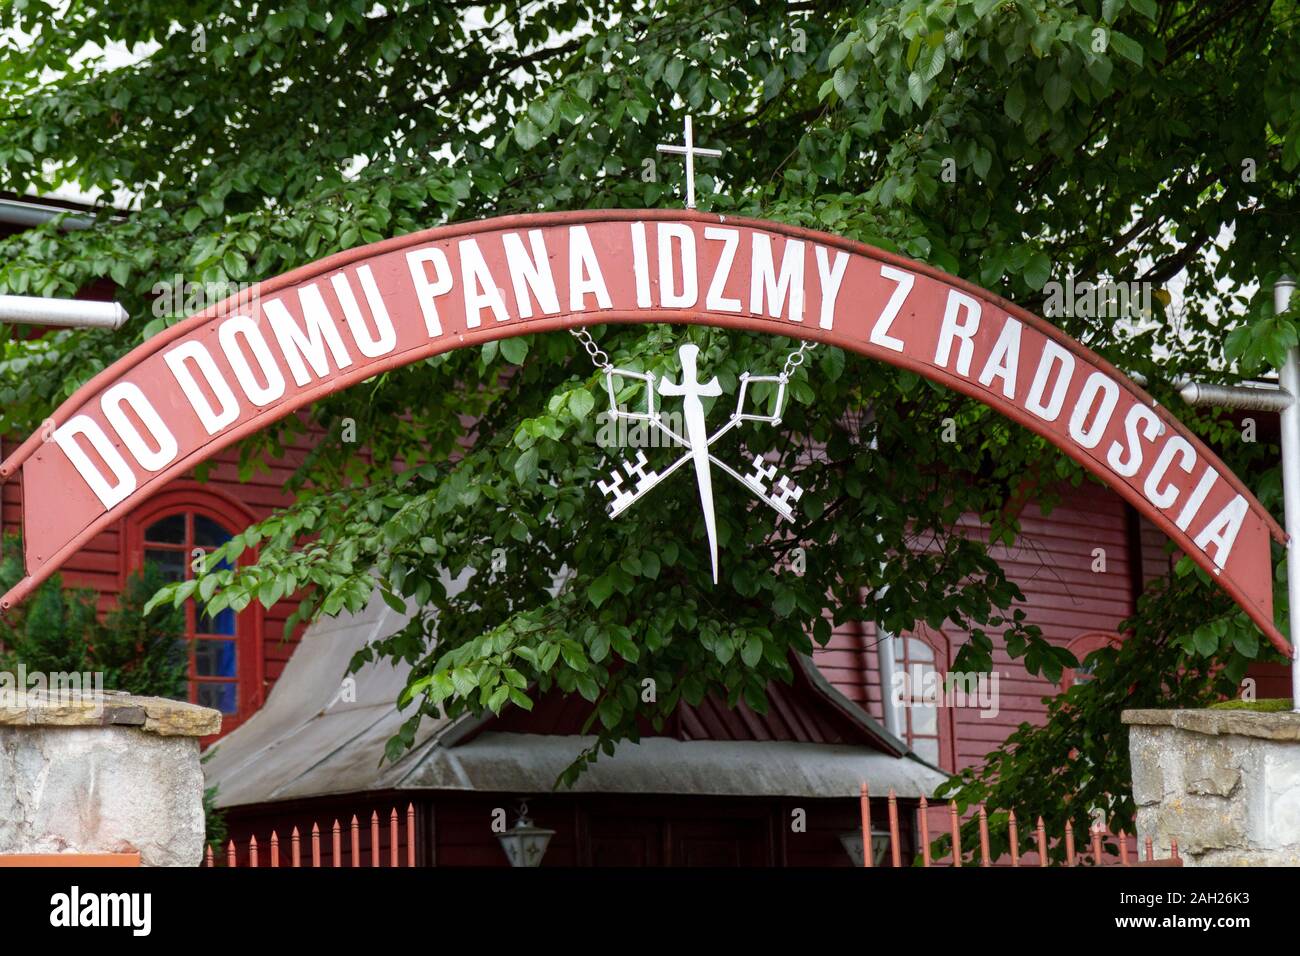 An arch with the words 'Do Domu Pana idzmy z radoscia' which in Polish mean 'We go to the House of the Lord with joy'. Stock Photo